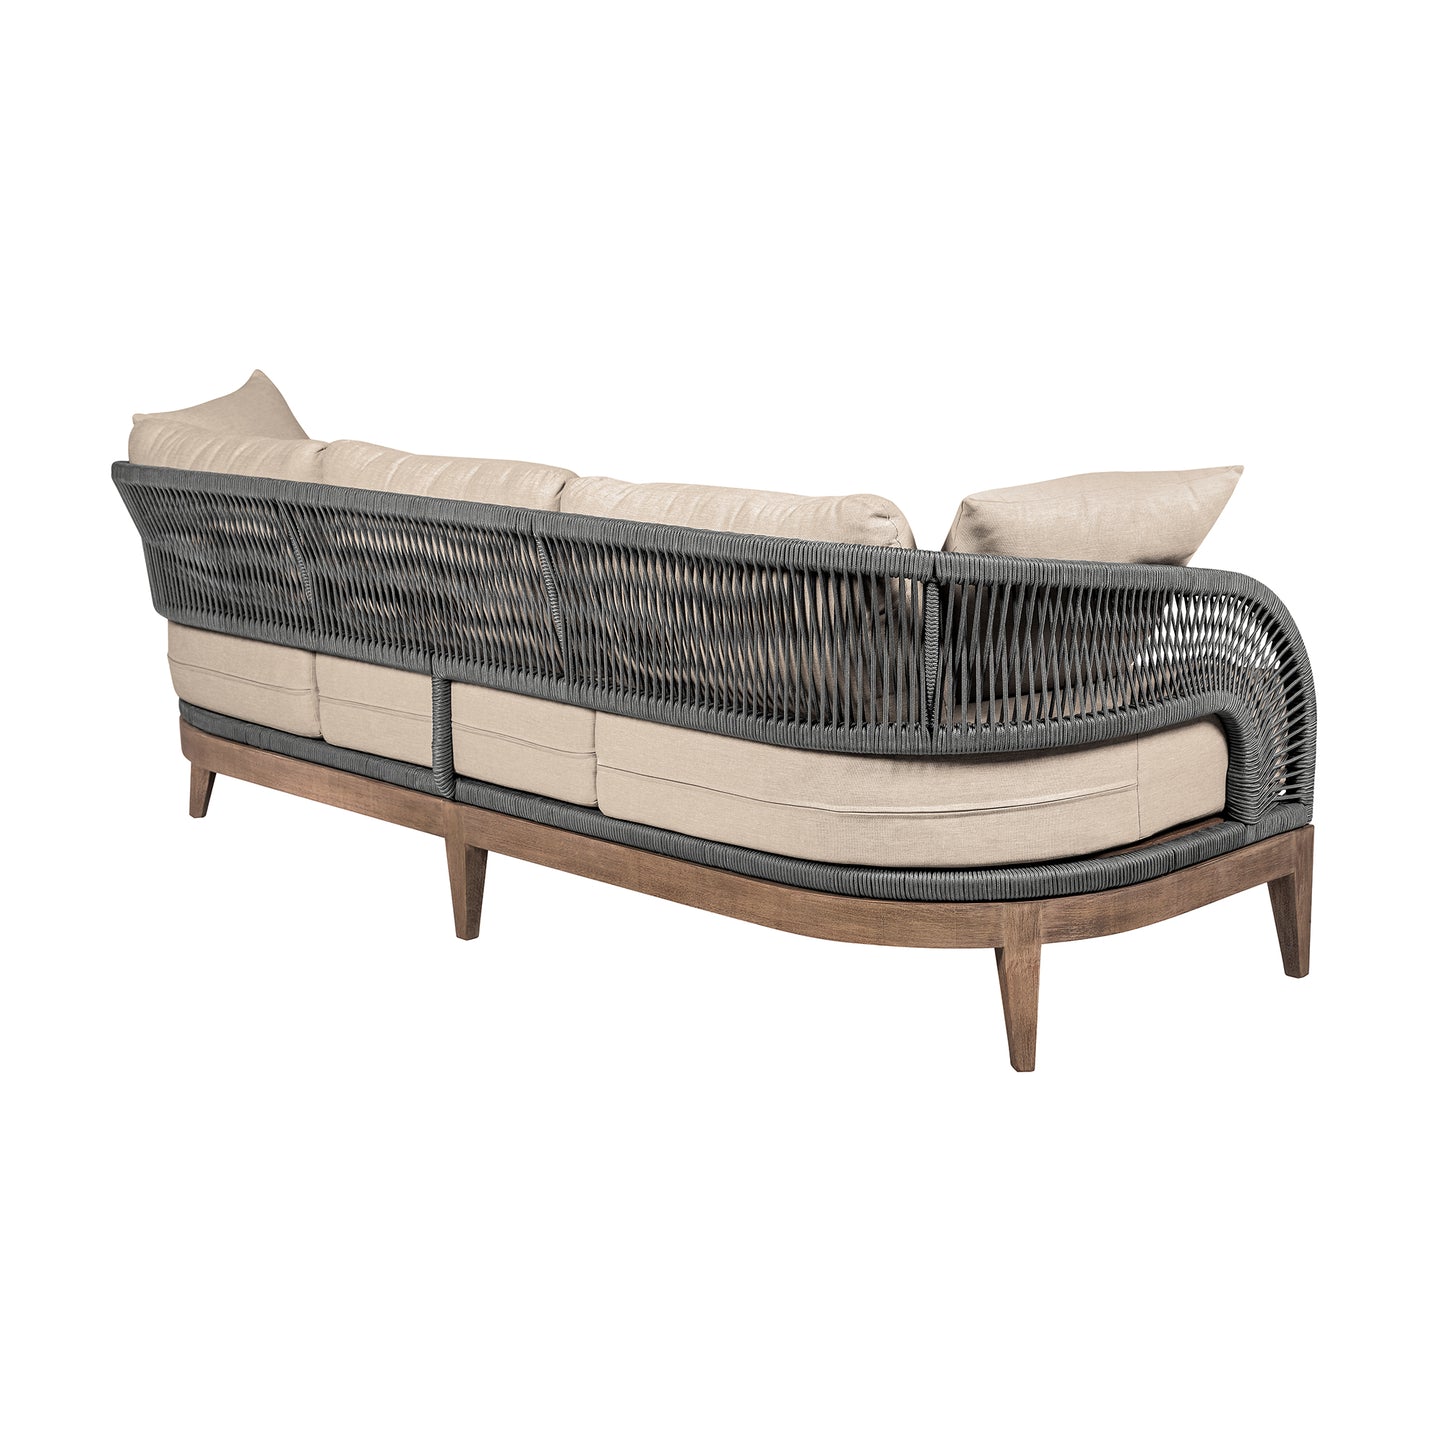 Orbit Outdoor Patio Sofa in Weathered Eucalyptus Wood with Gray Rope and Taupe Olefin Cushions